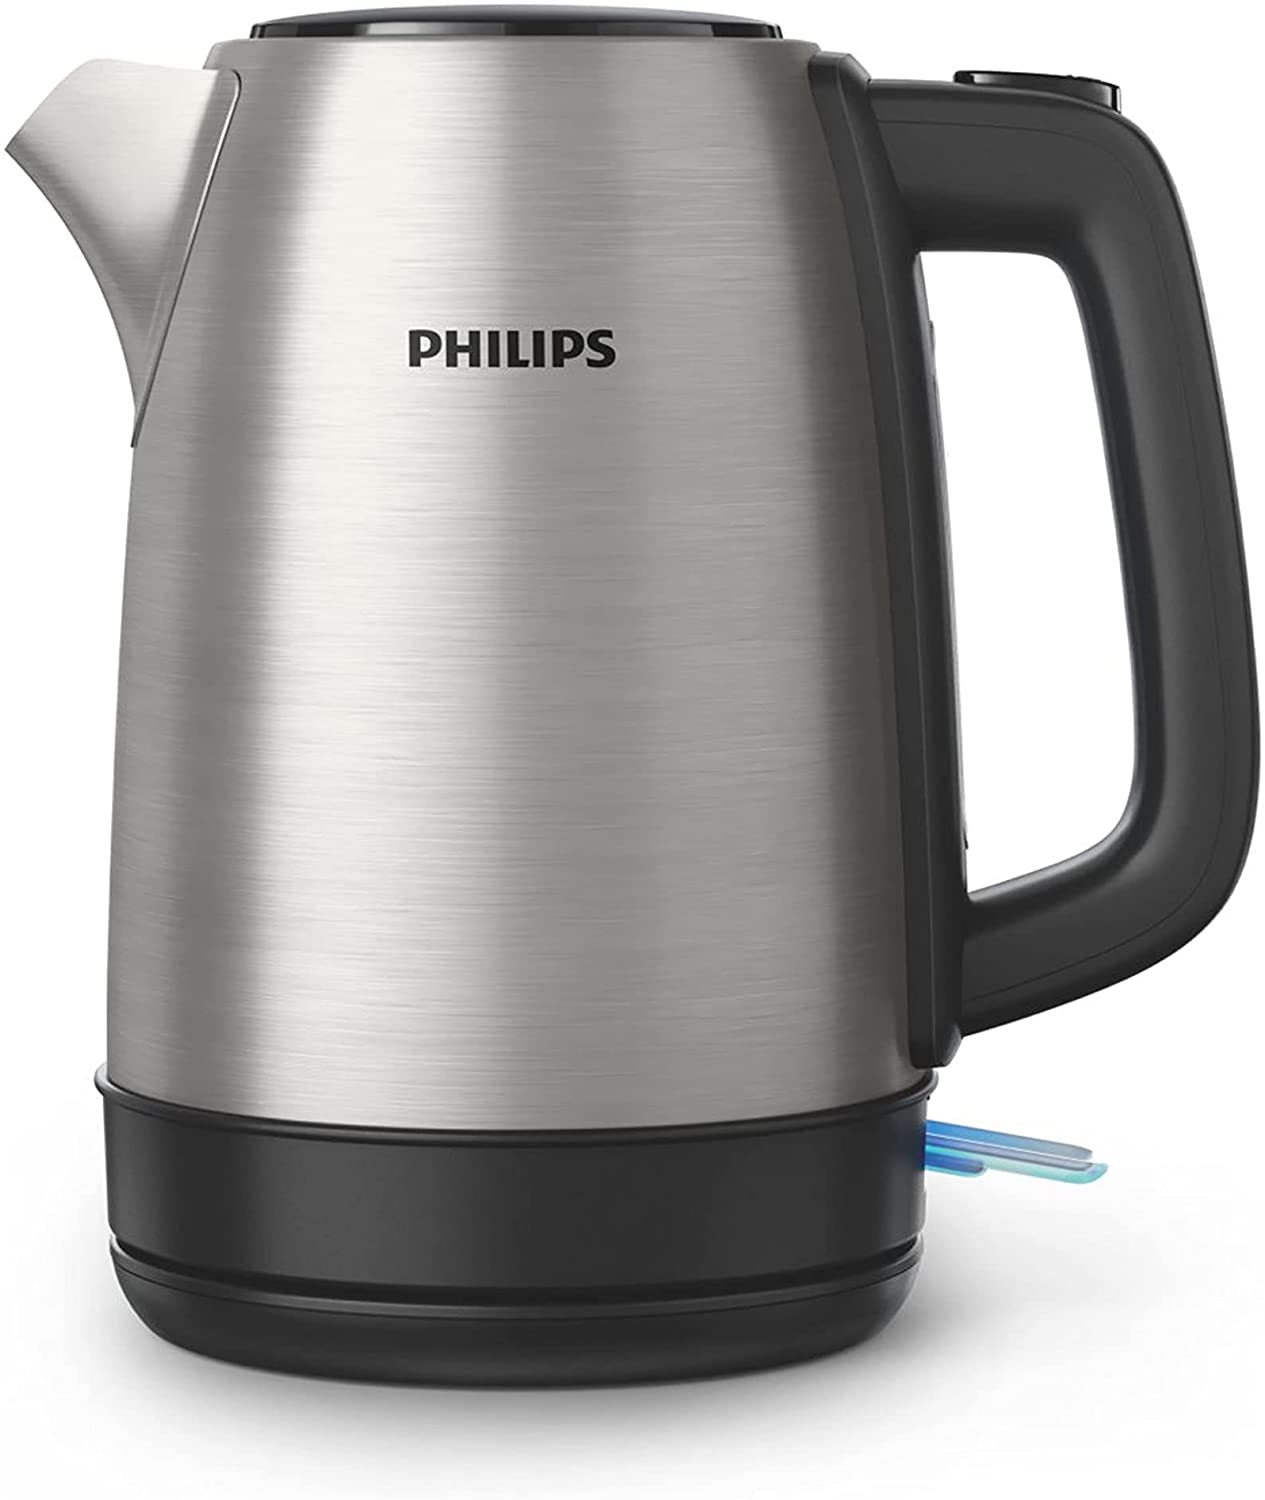 Philips Domestic Appliances Philips Daily Collection HD9350/90 Kettle 1.7 L 2200 W Light Indicator Steel